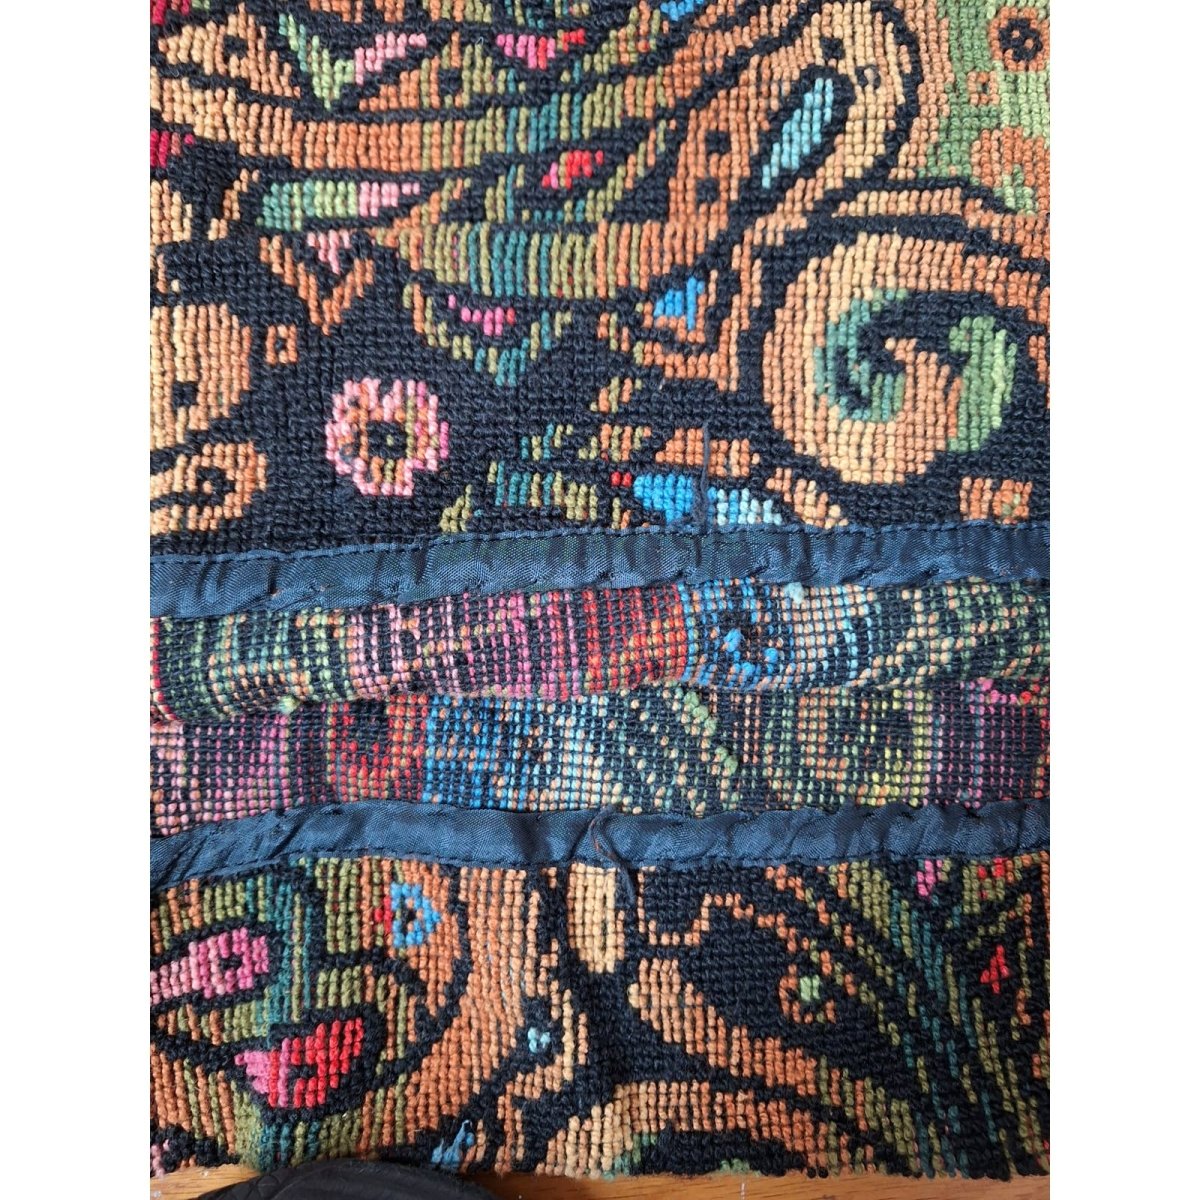 Vintage 60s/70s Psychedelic Paisley Tapestry maxi Skirt Medium Waist 30" - themallvintage The Mall Vintage